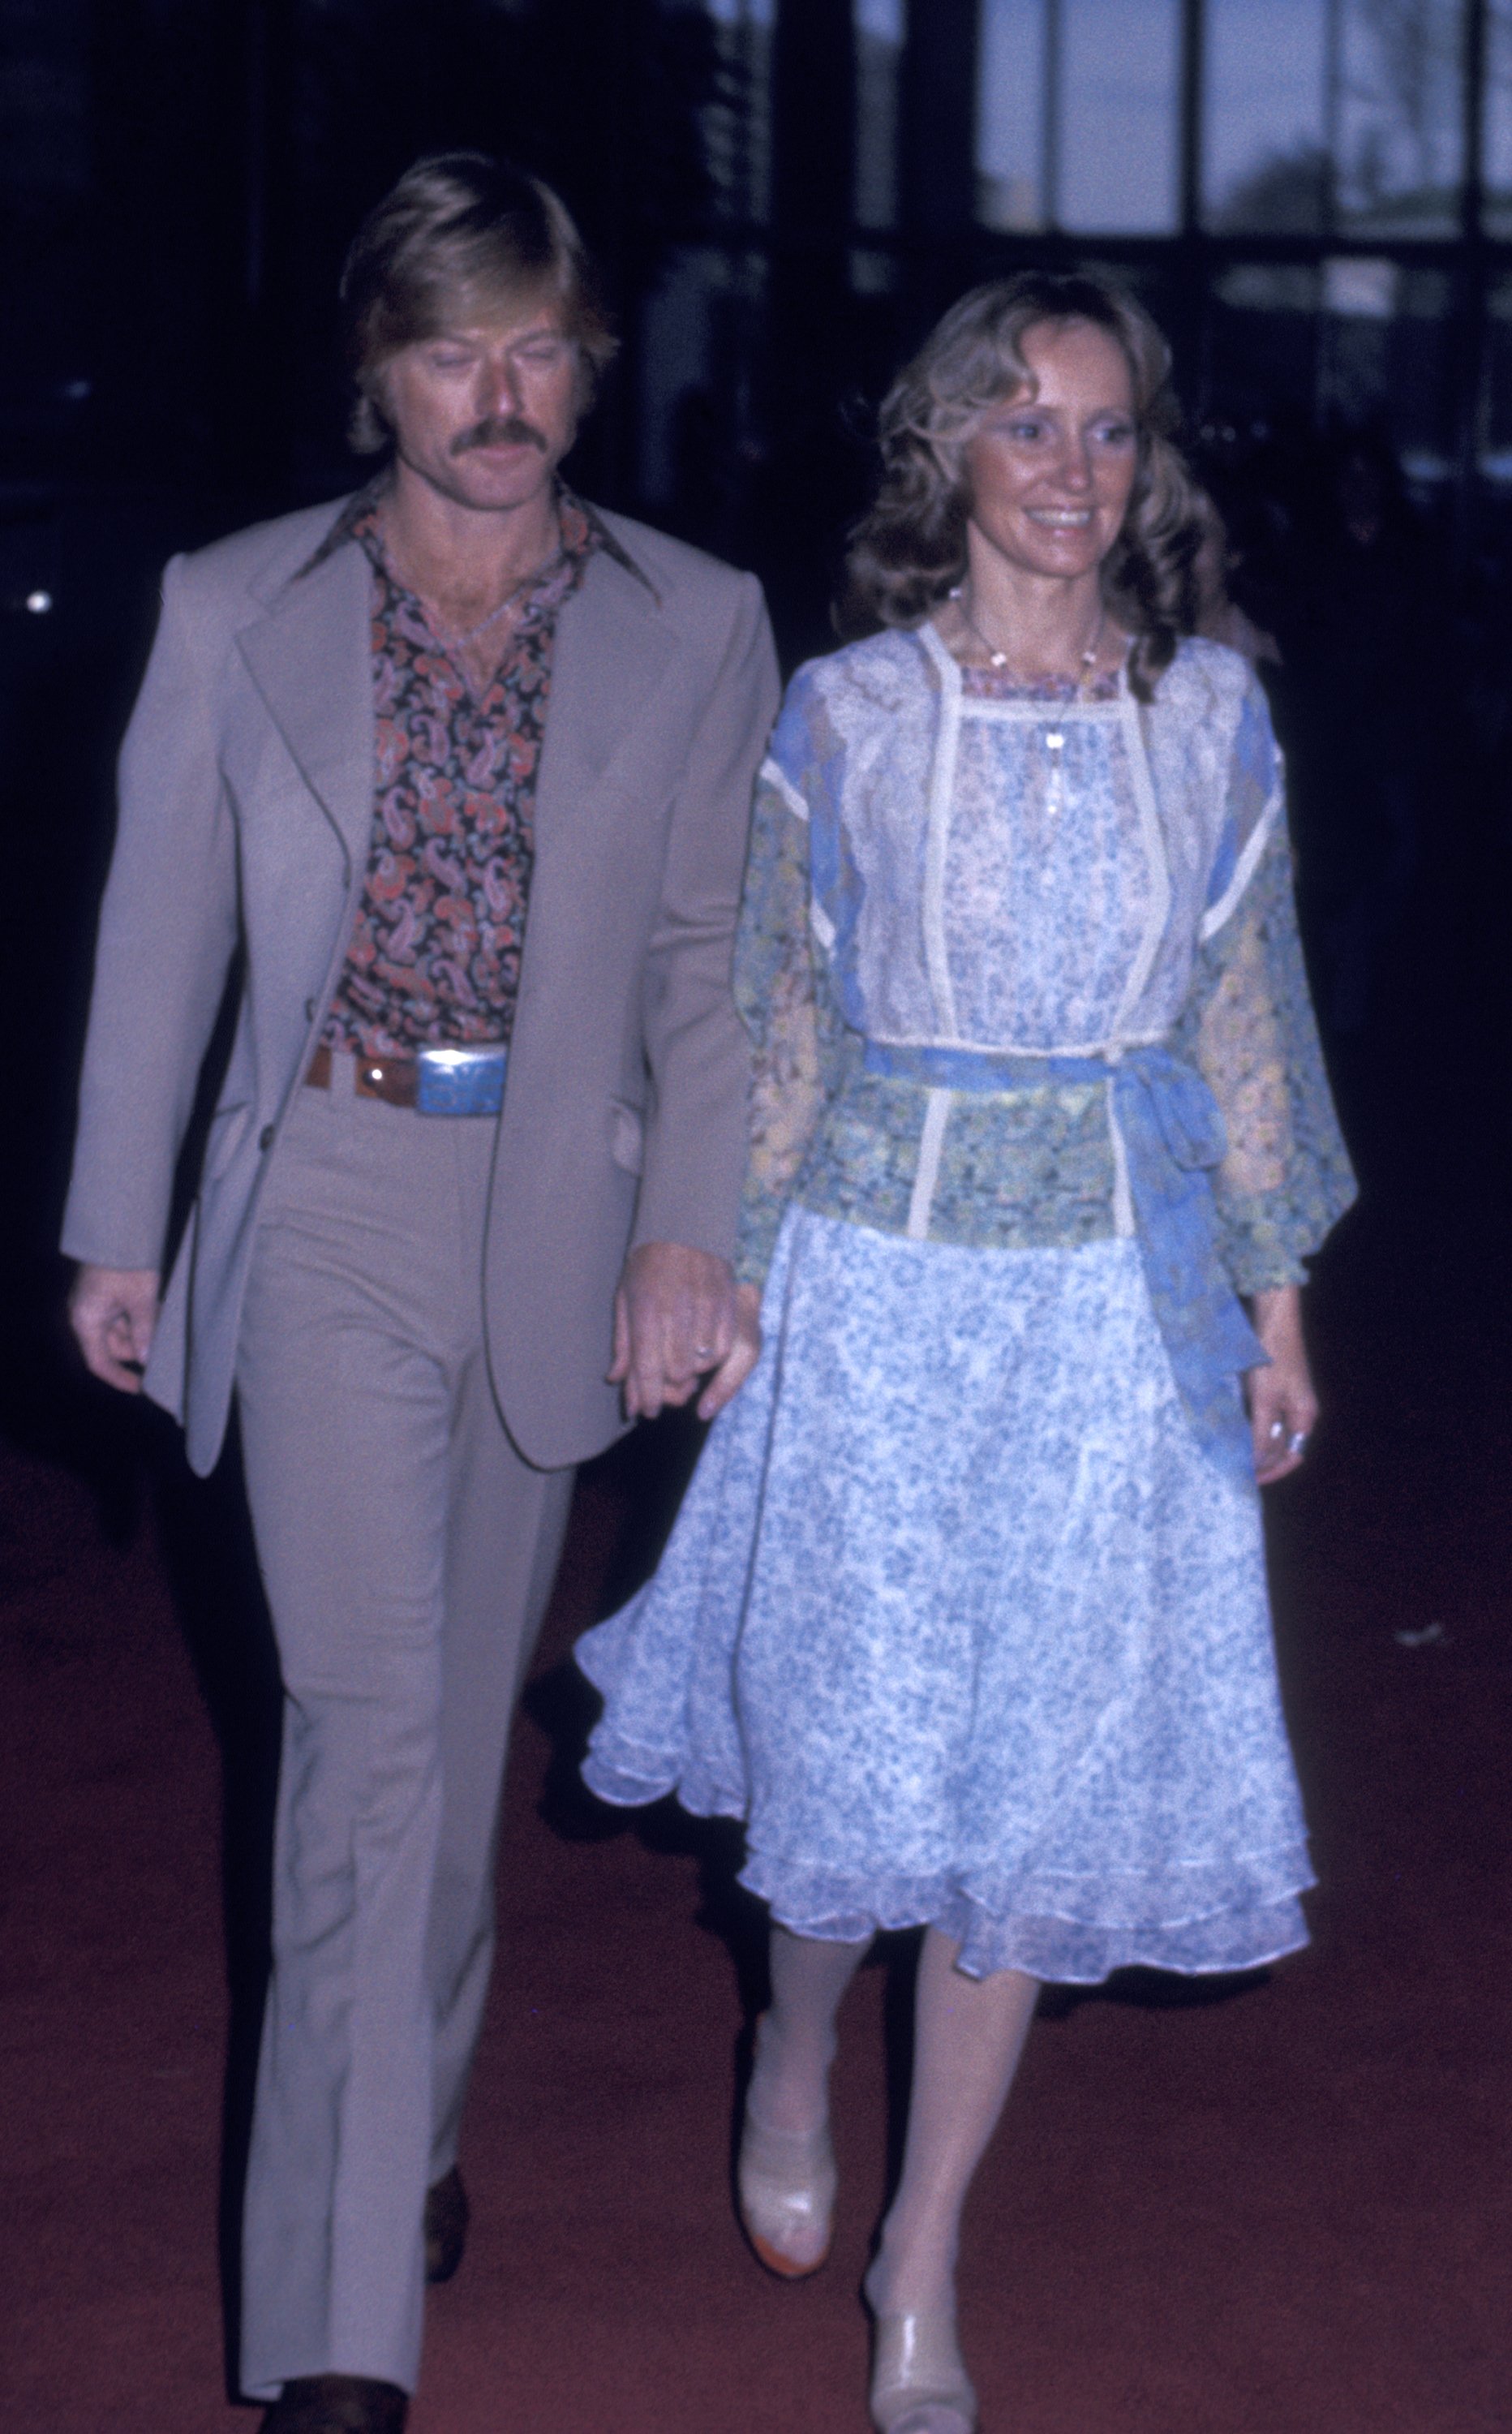 Lola Redford and Robert Redford at the premiere of "All the President's Men" in New York on April 4, 1976 | Source: Getty Images